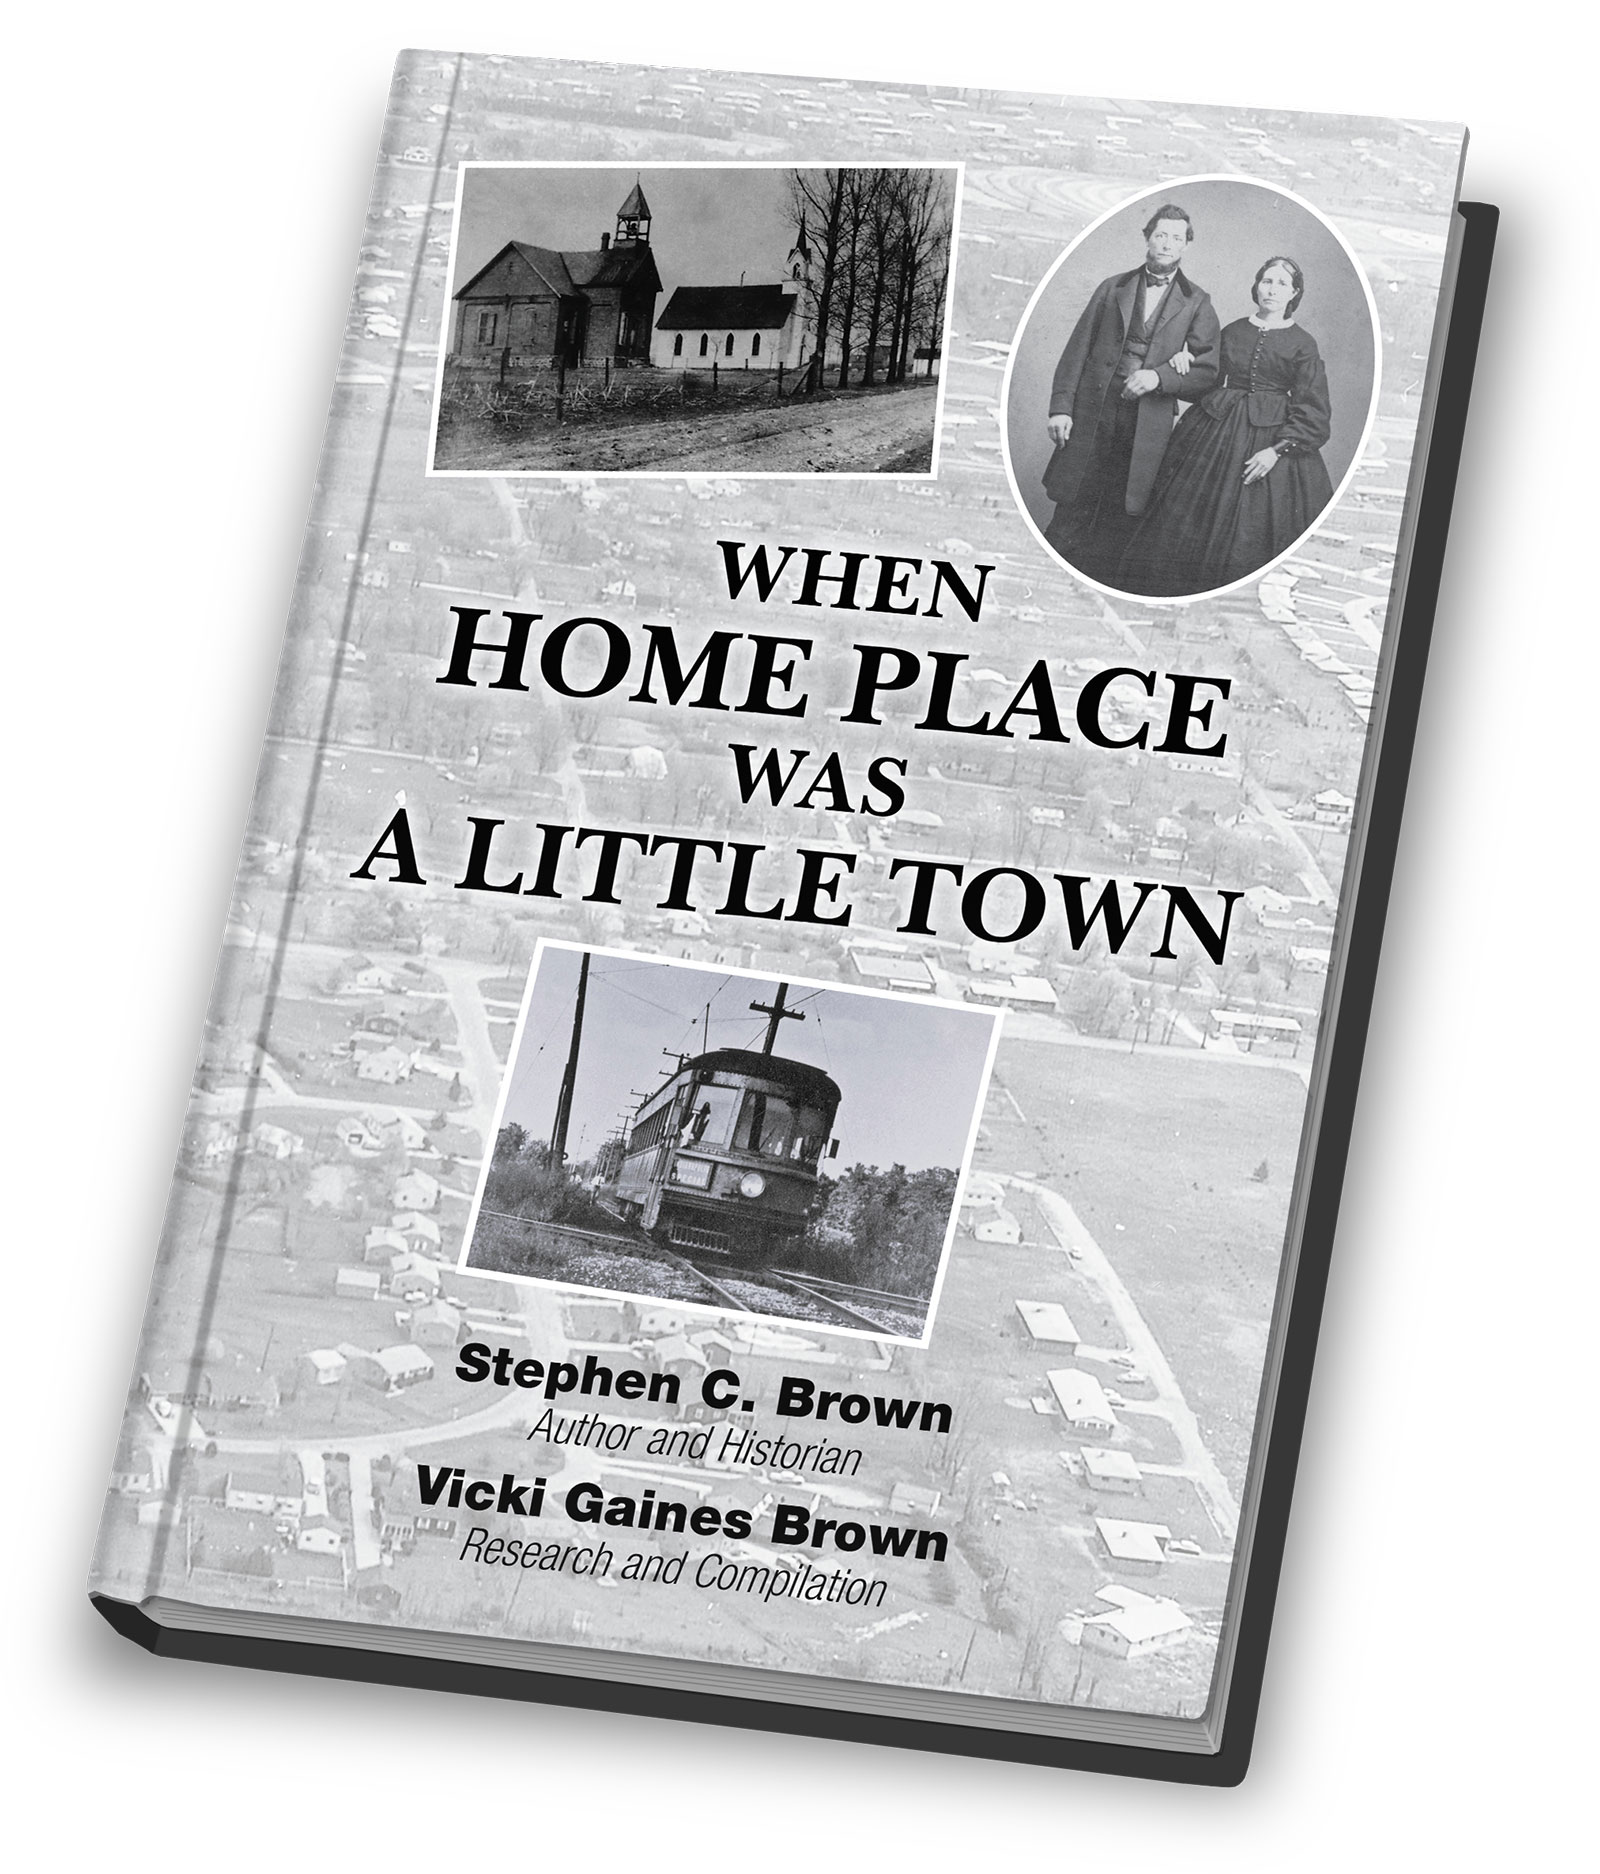 When Home Place Was a Little Town by Stephen C. Brown